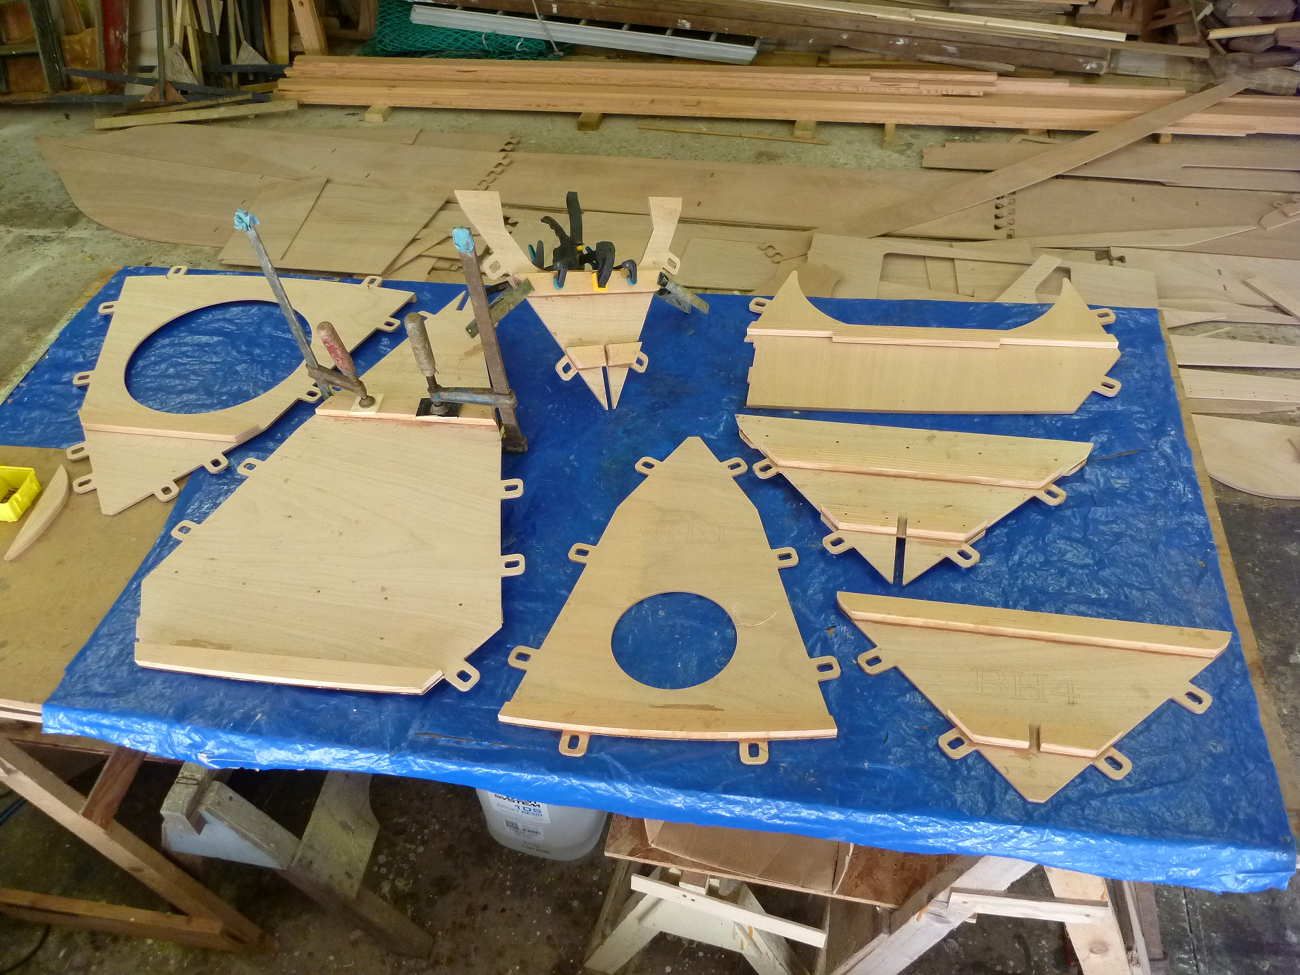 Mana 24 pre-cut plywood parts on a work bench